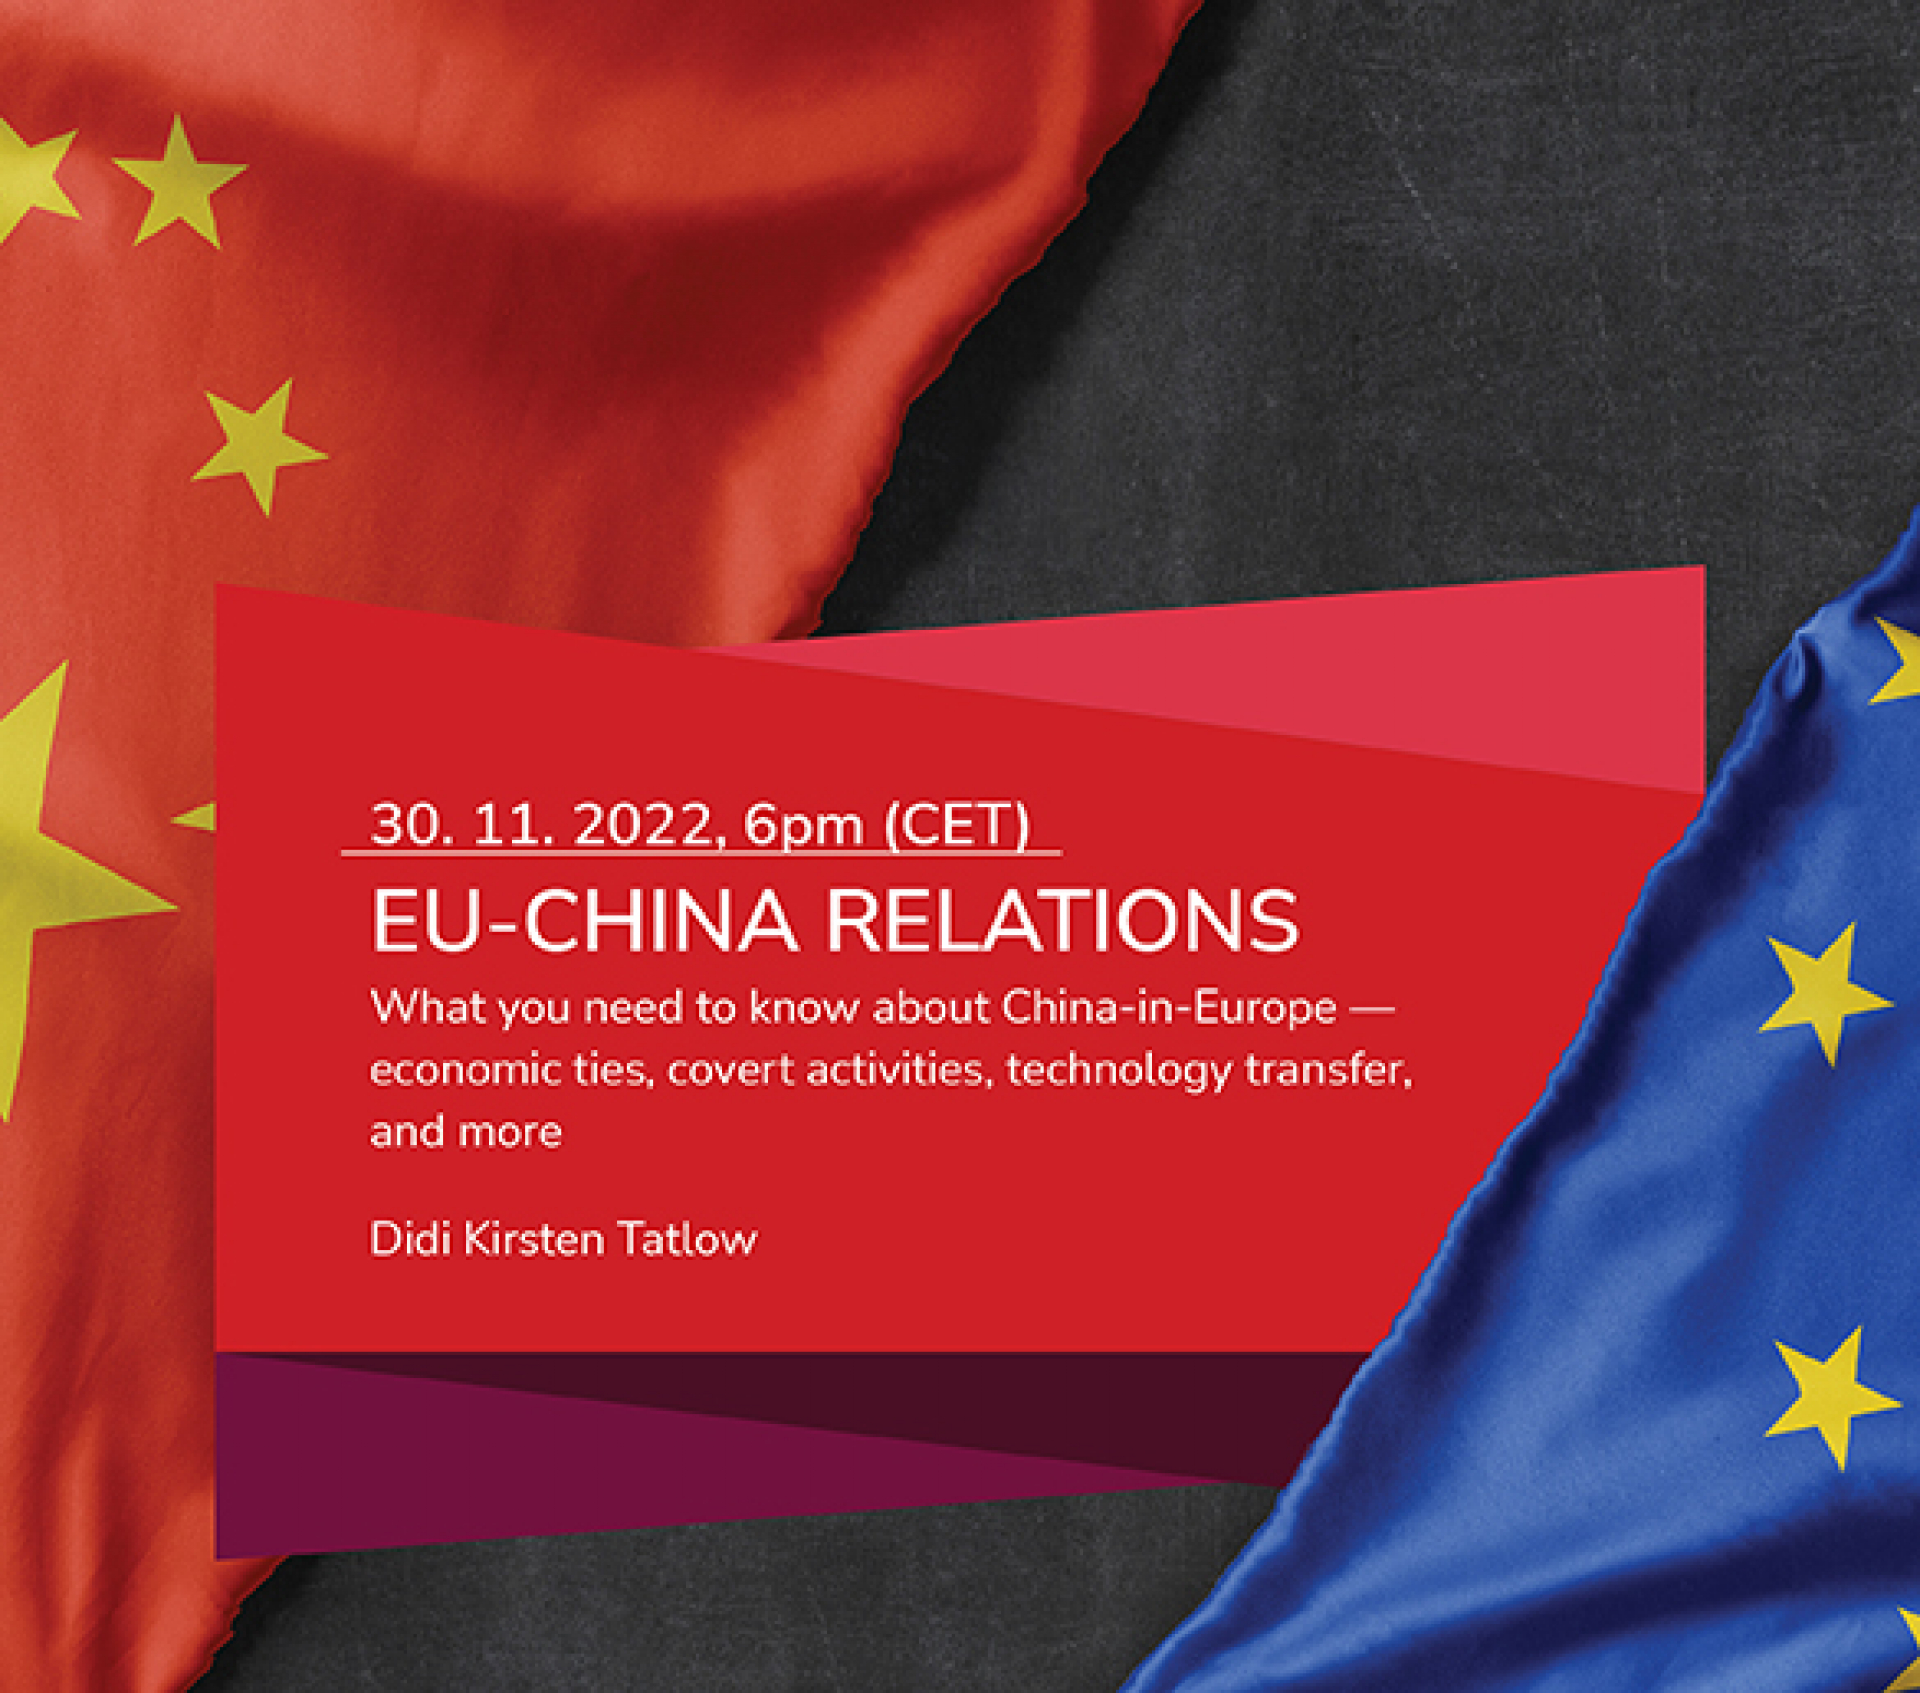 What you need to know about China-in-Europe -- economic ties, covert activities, technology transfer, and more